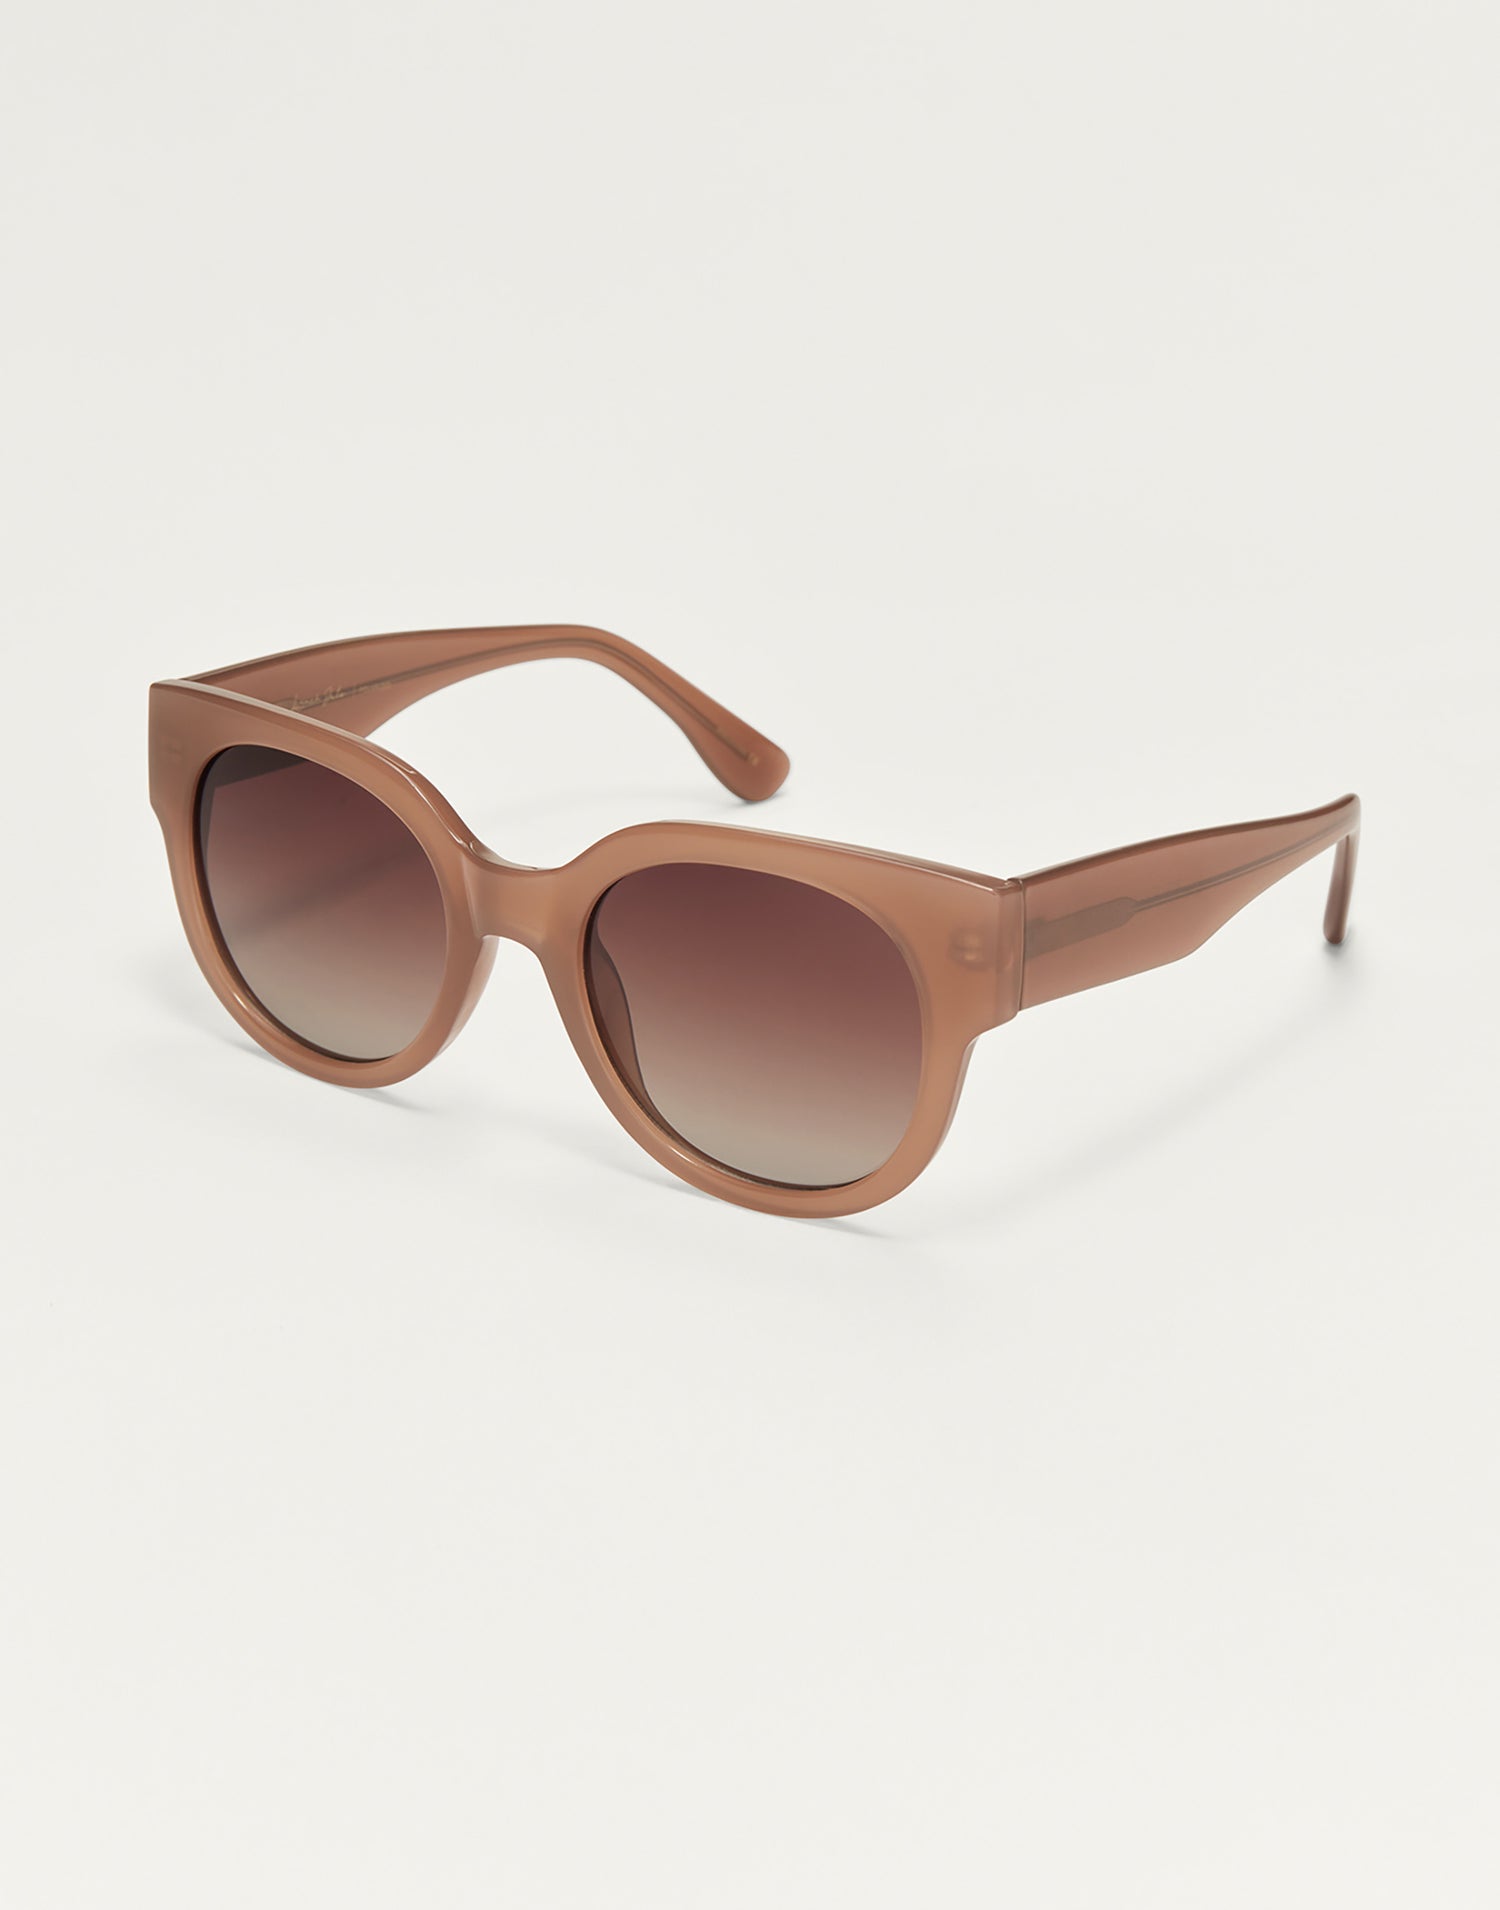 Lunch Date Sunglasses by Z Supply in Taupe - Angled View